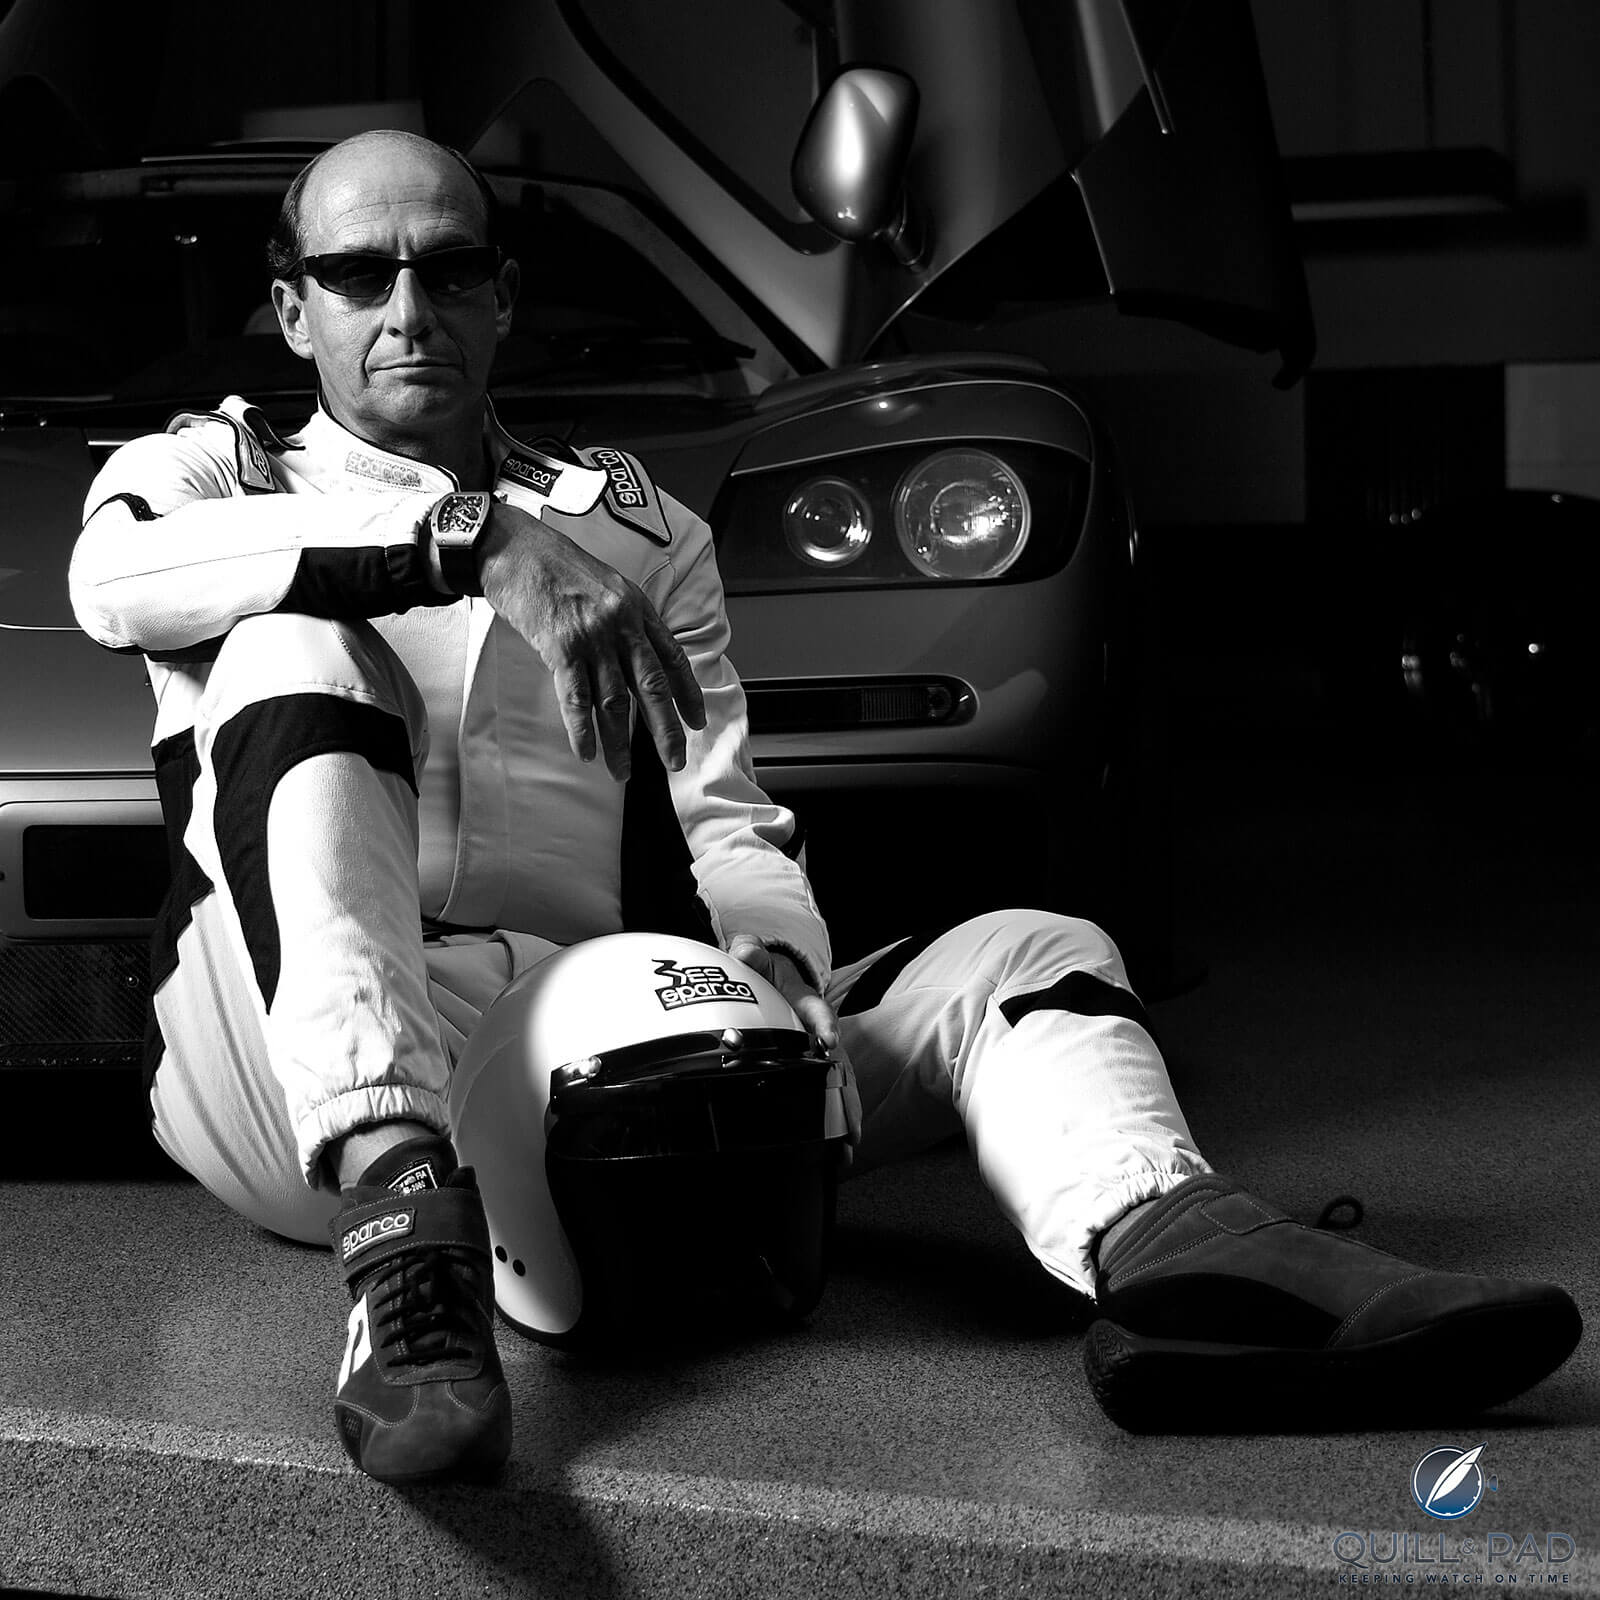 Charles Gauthier - Racing driver